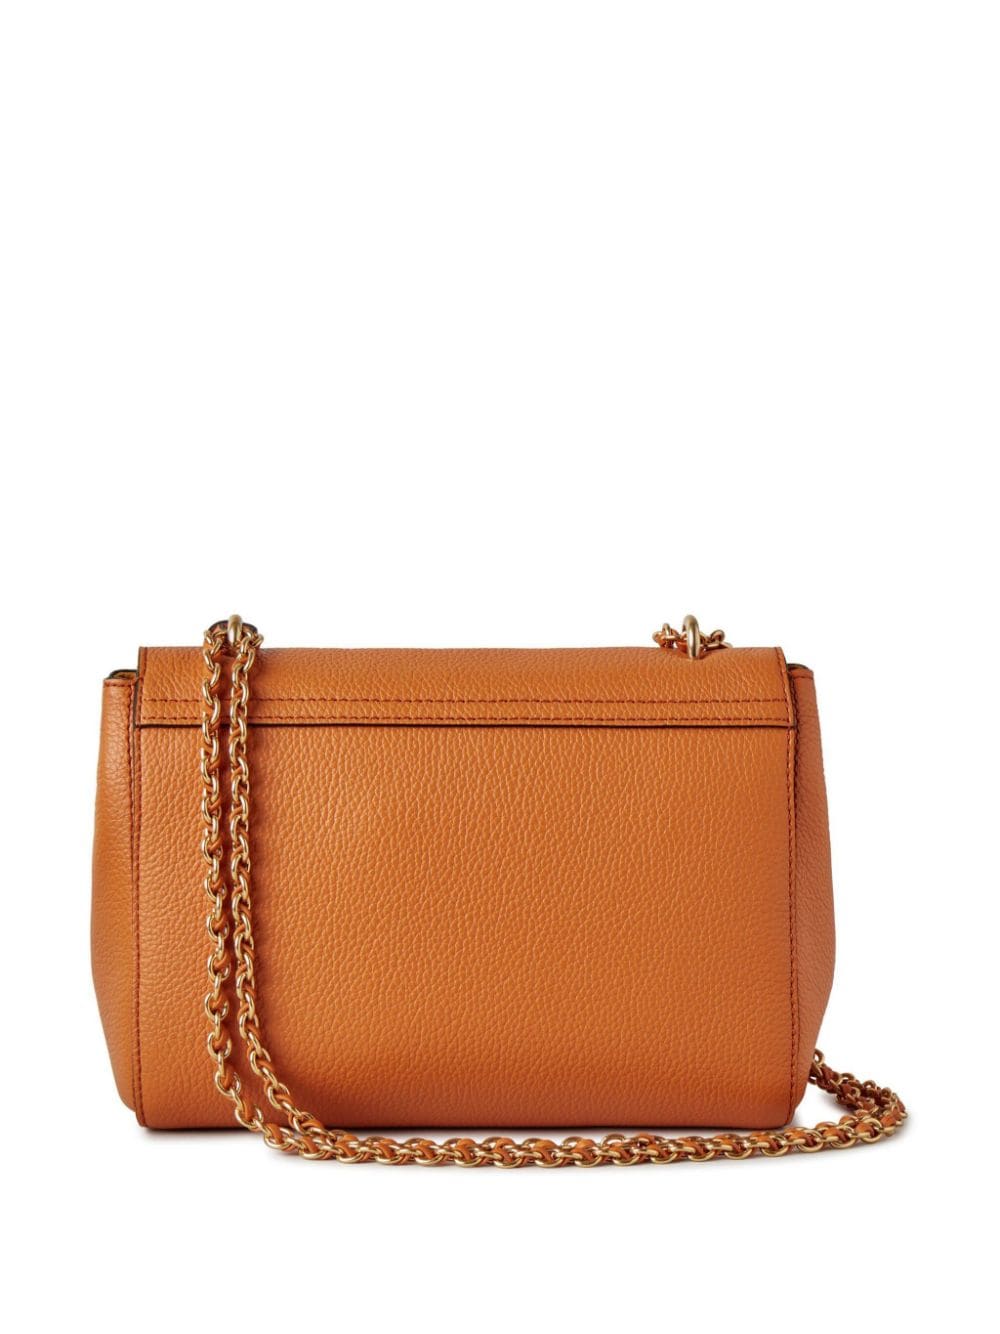 Mulberry small Lily leather shoulder bag - Bruin